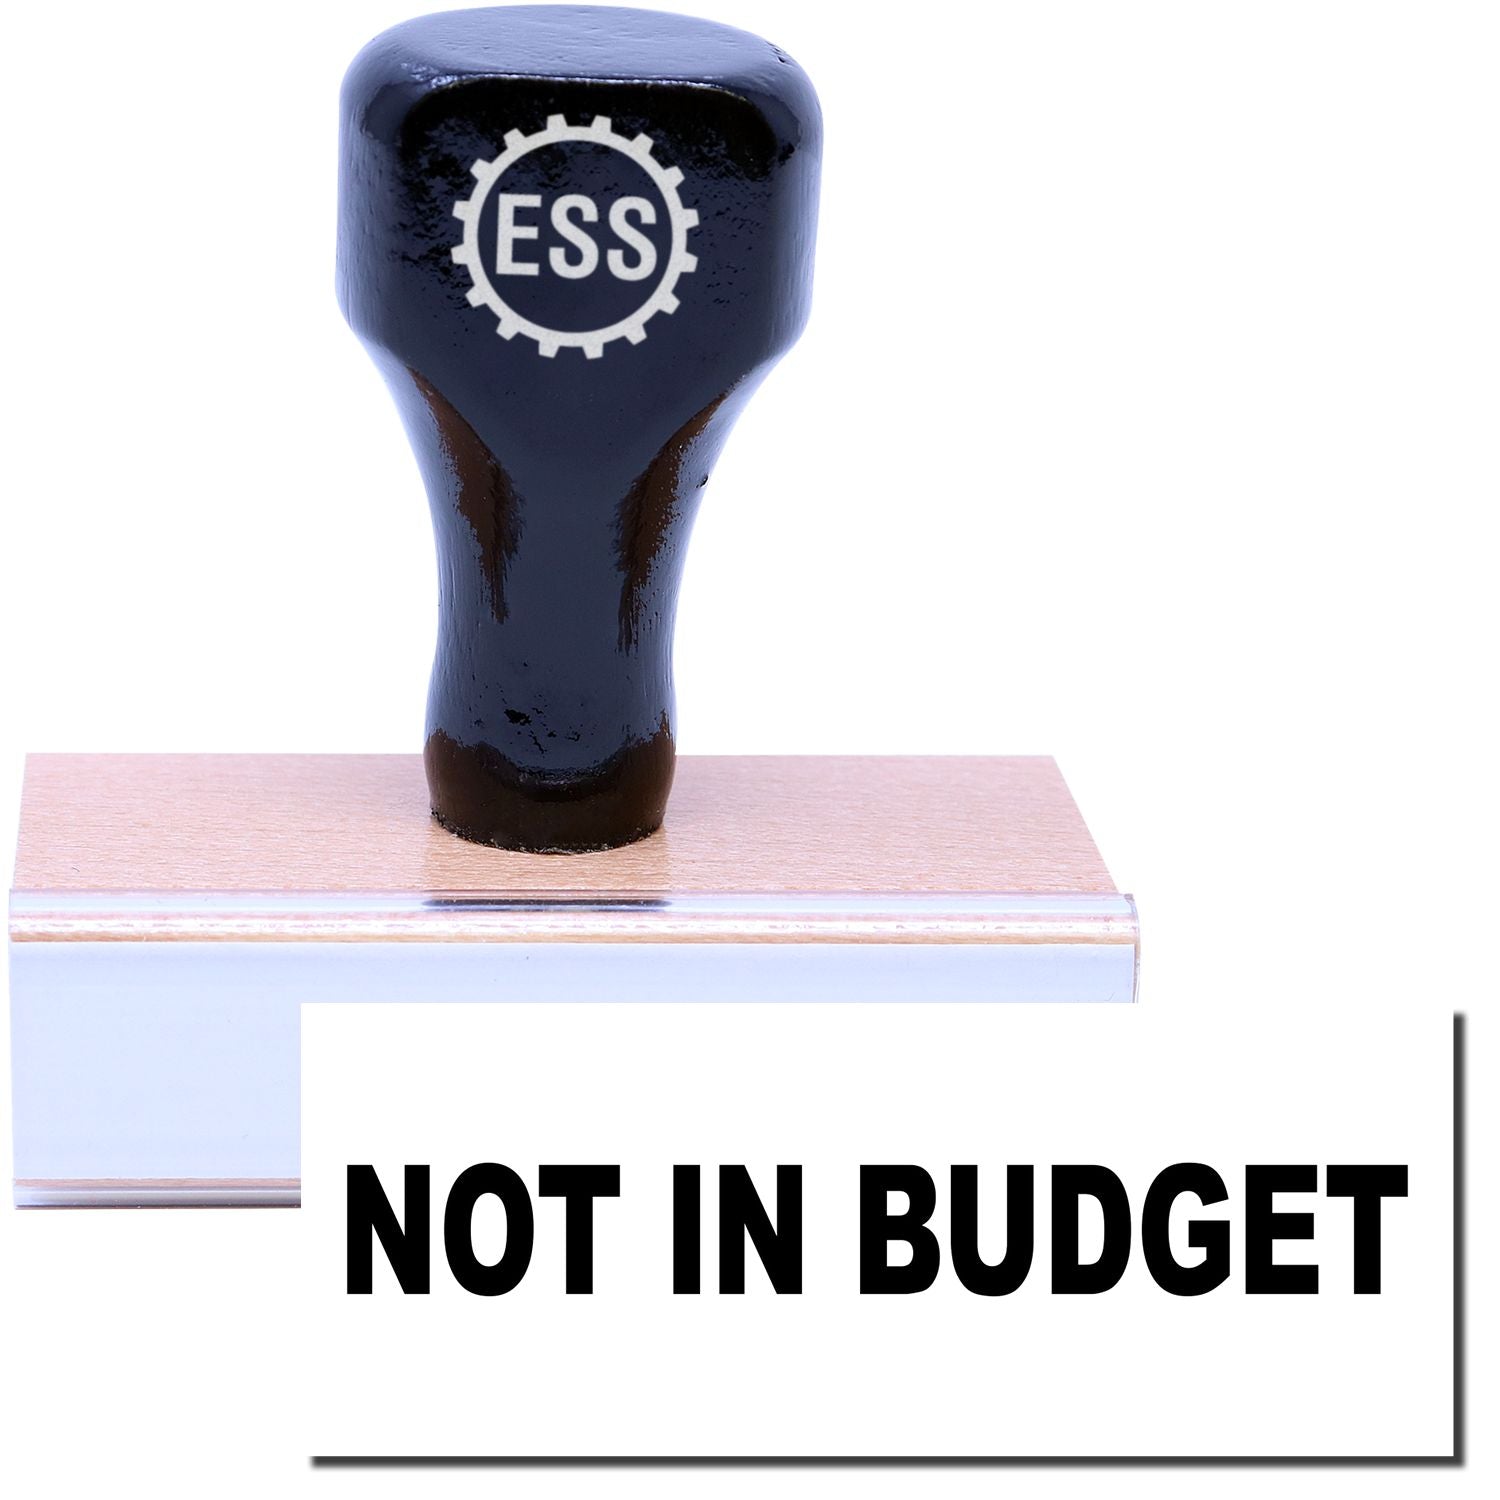 A stock office rubber stamp with a stamped image showing how the text "NOT IN BUDGET" in a large font is displayed after stamping.